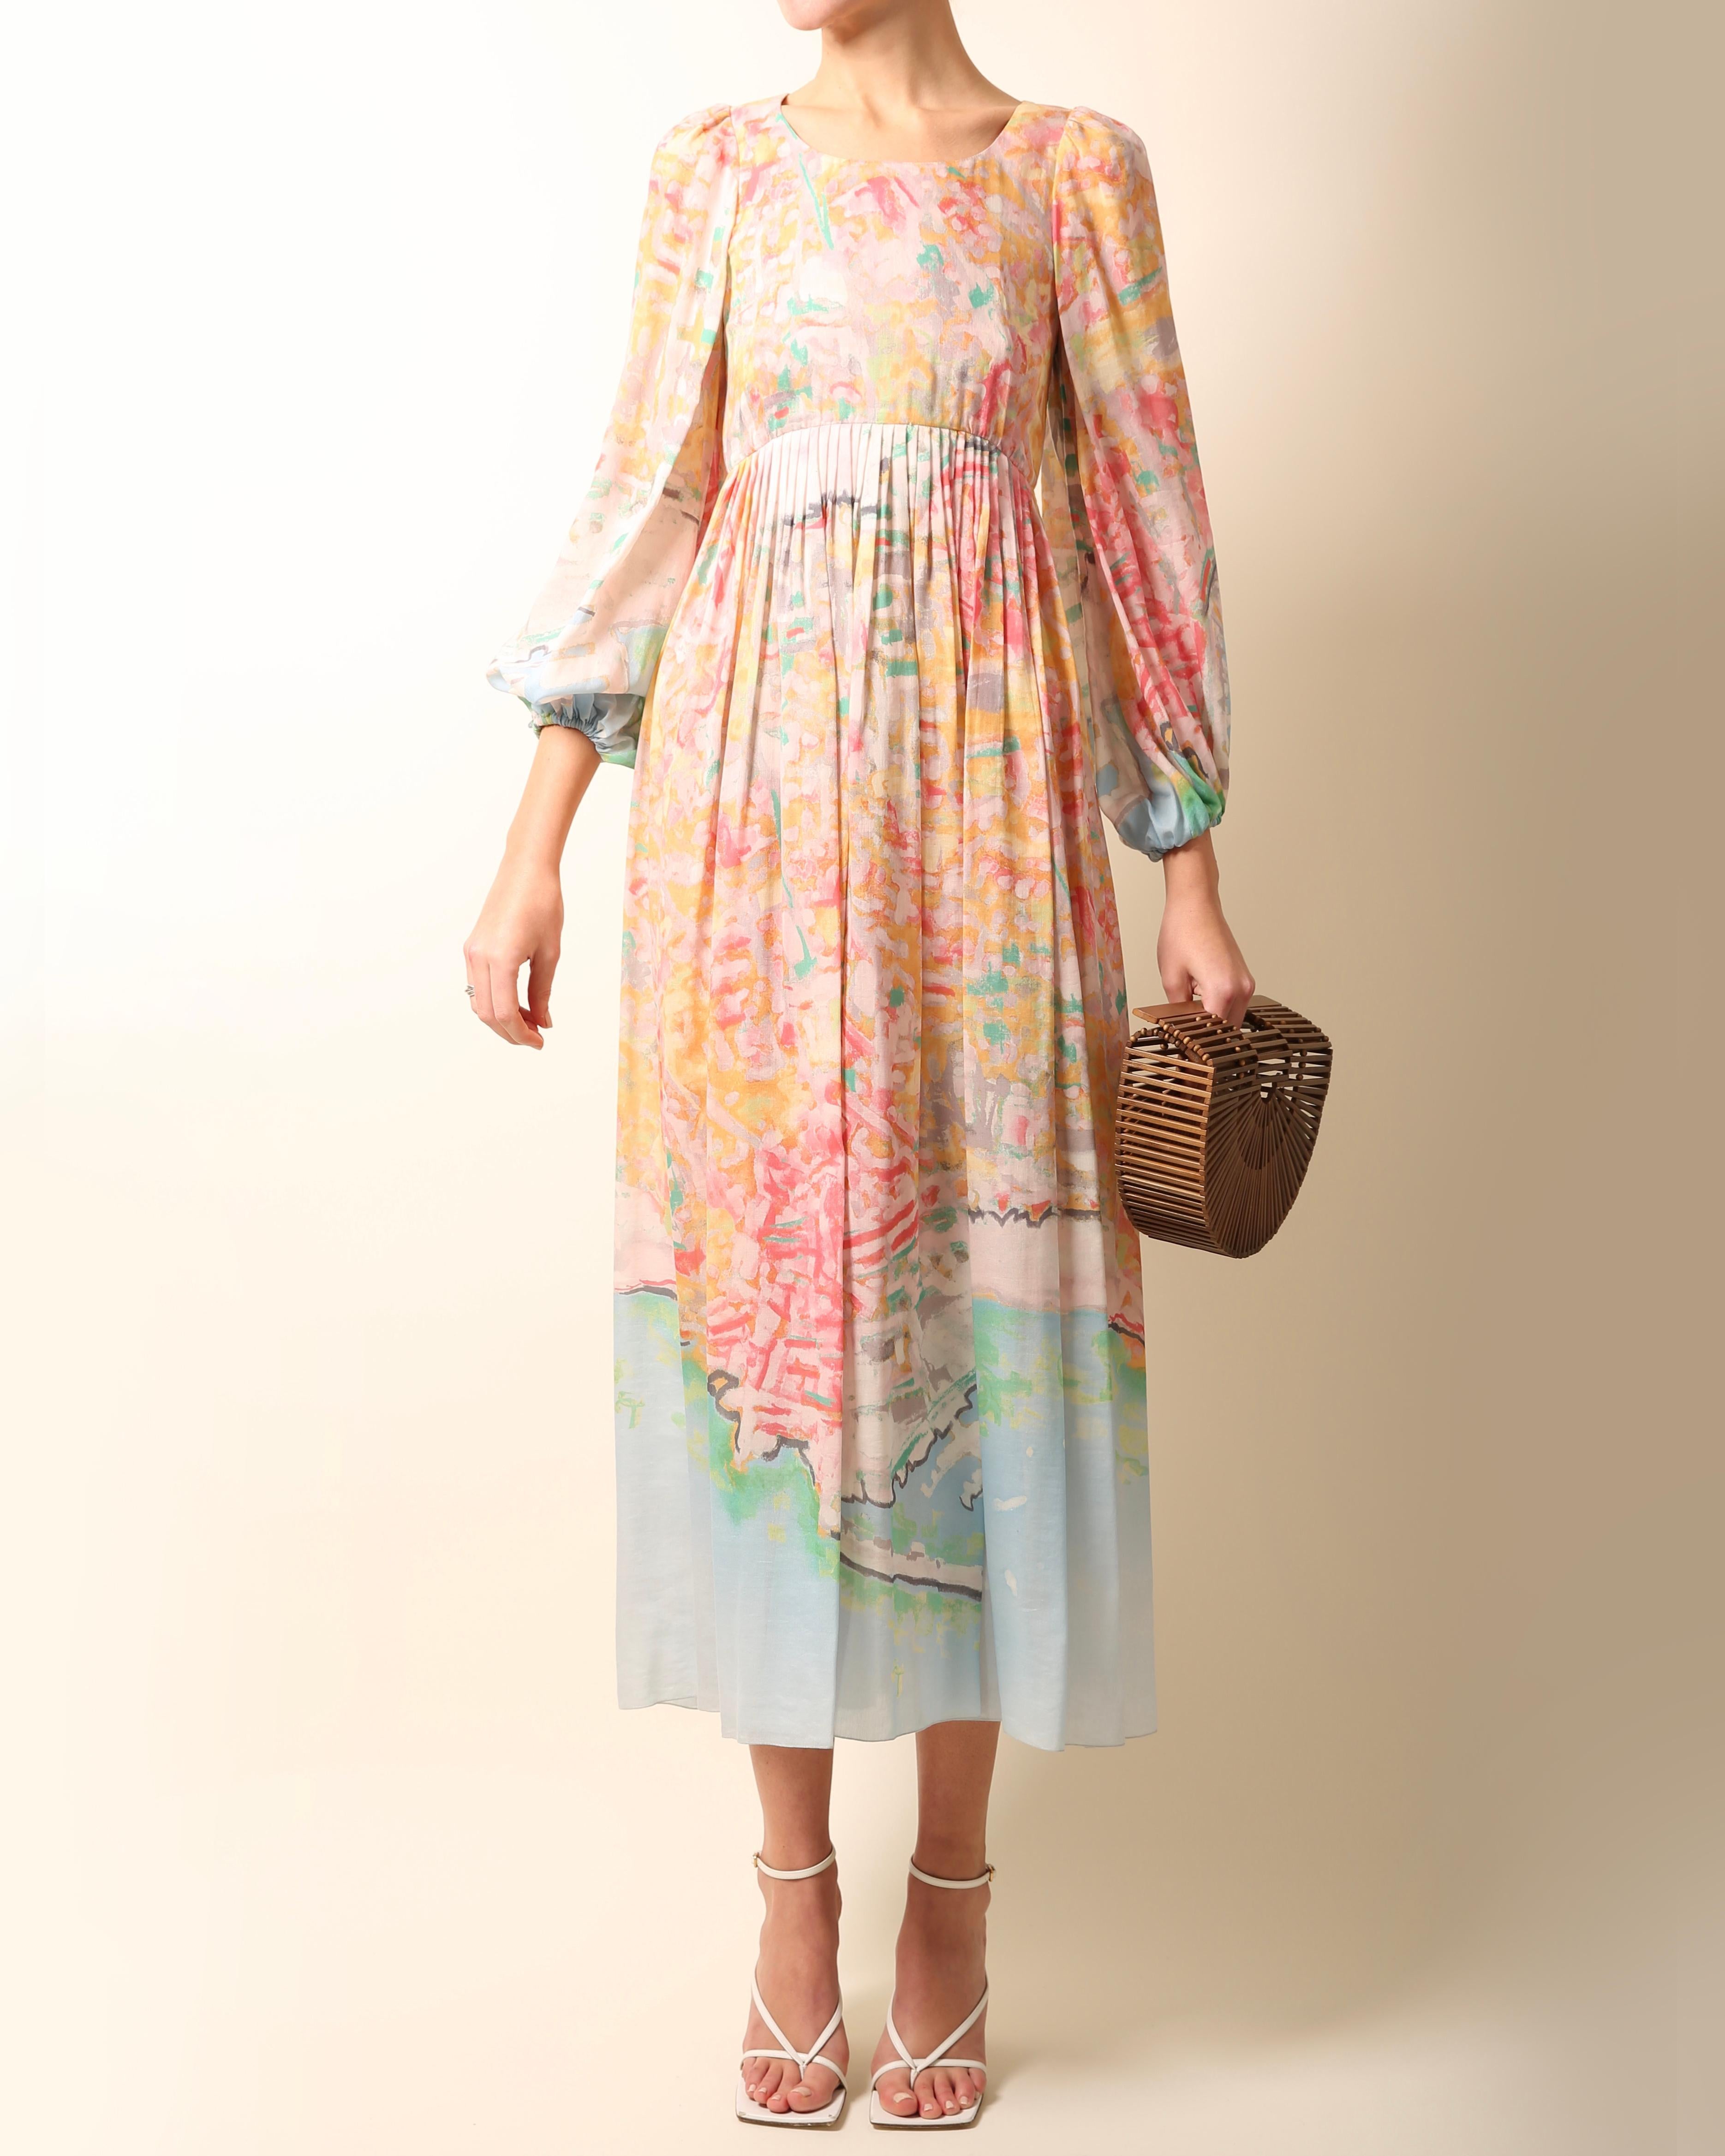 Chanel Resort 2011
Rare babydoll style midi length dress in a beautiful array of pastel colours
Abstract watercolour style print
Sleeves are ruched at the cuff creating a balloon effect
Free flowing skirt with pleat detail
Cinched in waist
Concealed